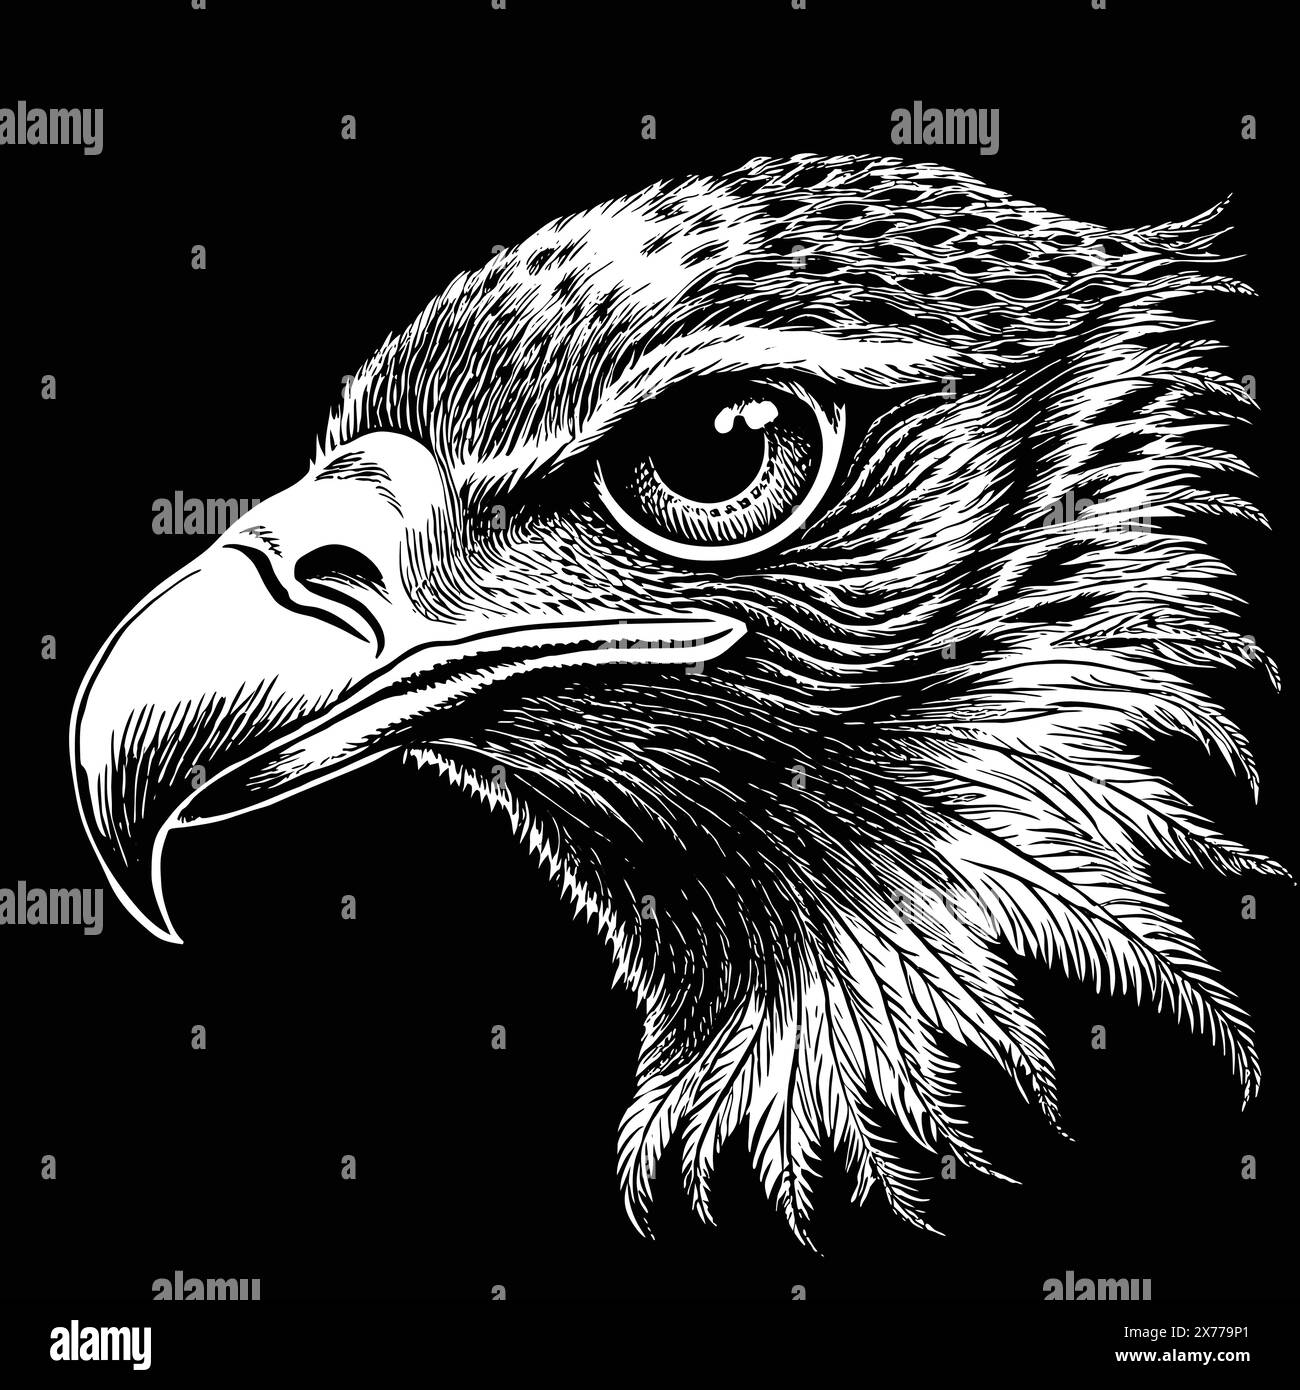 An eagle head illustration in black and white. Stock Vector